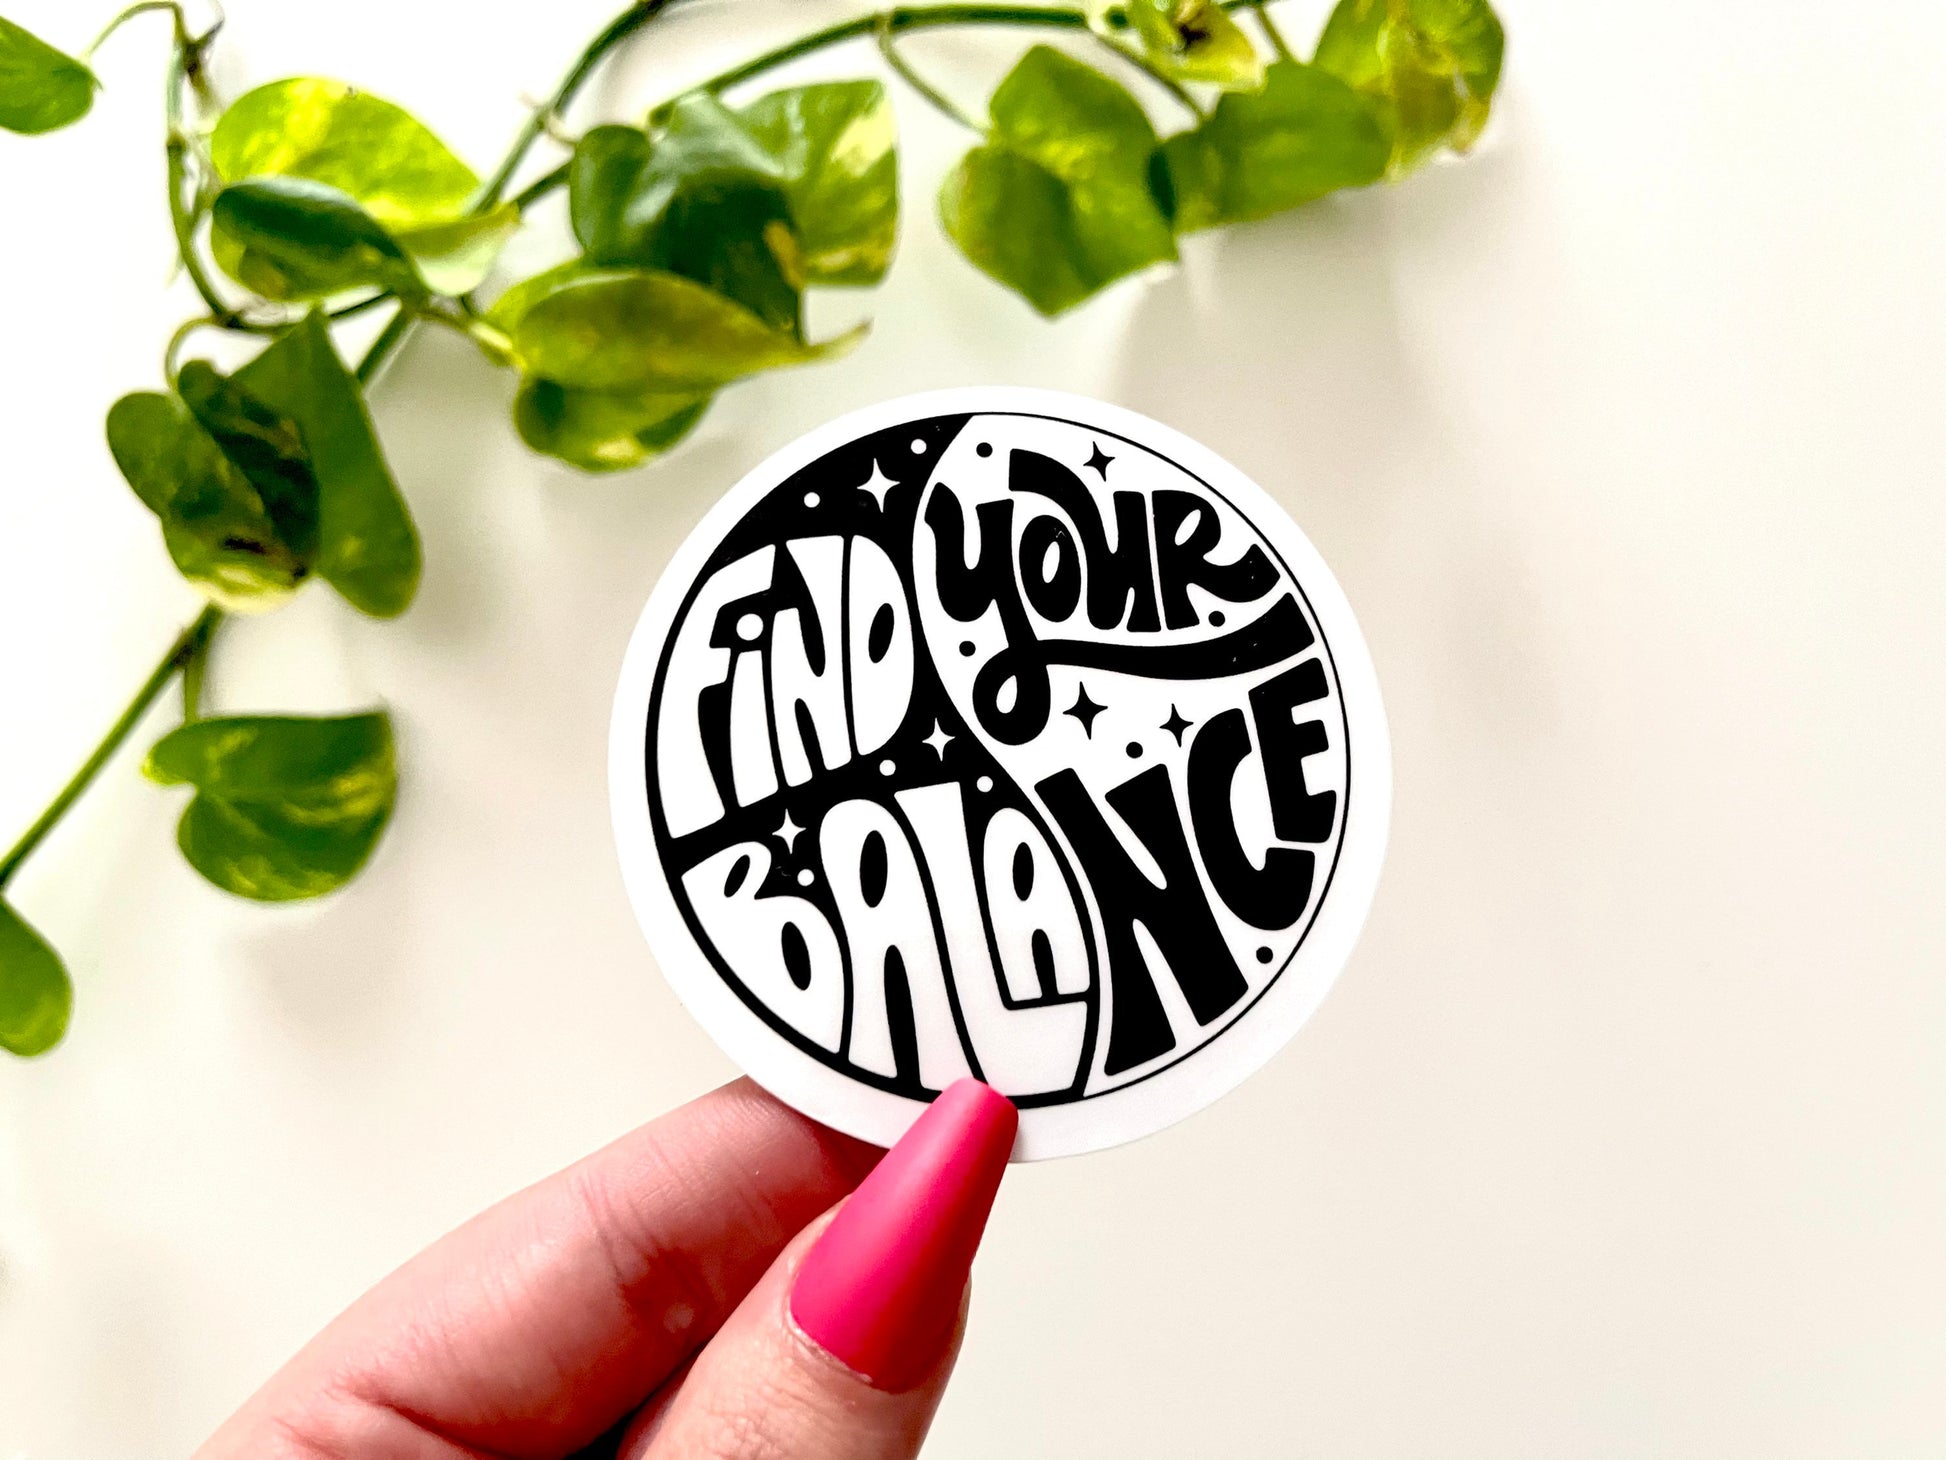 Find Your Balance Waterproof Sticker - Kindness Matters - Therapist Stickers - Gifts for Her - Positivity Decals - Be Positive, Yin and Yang